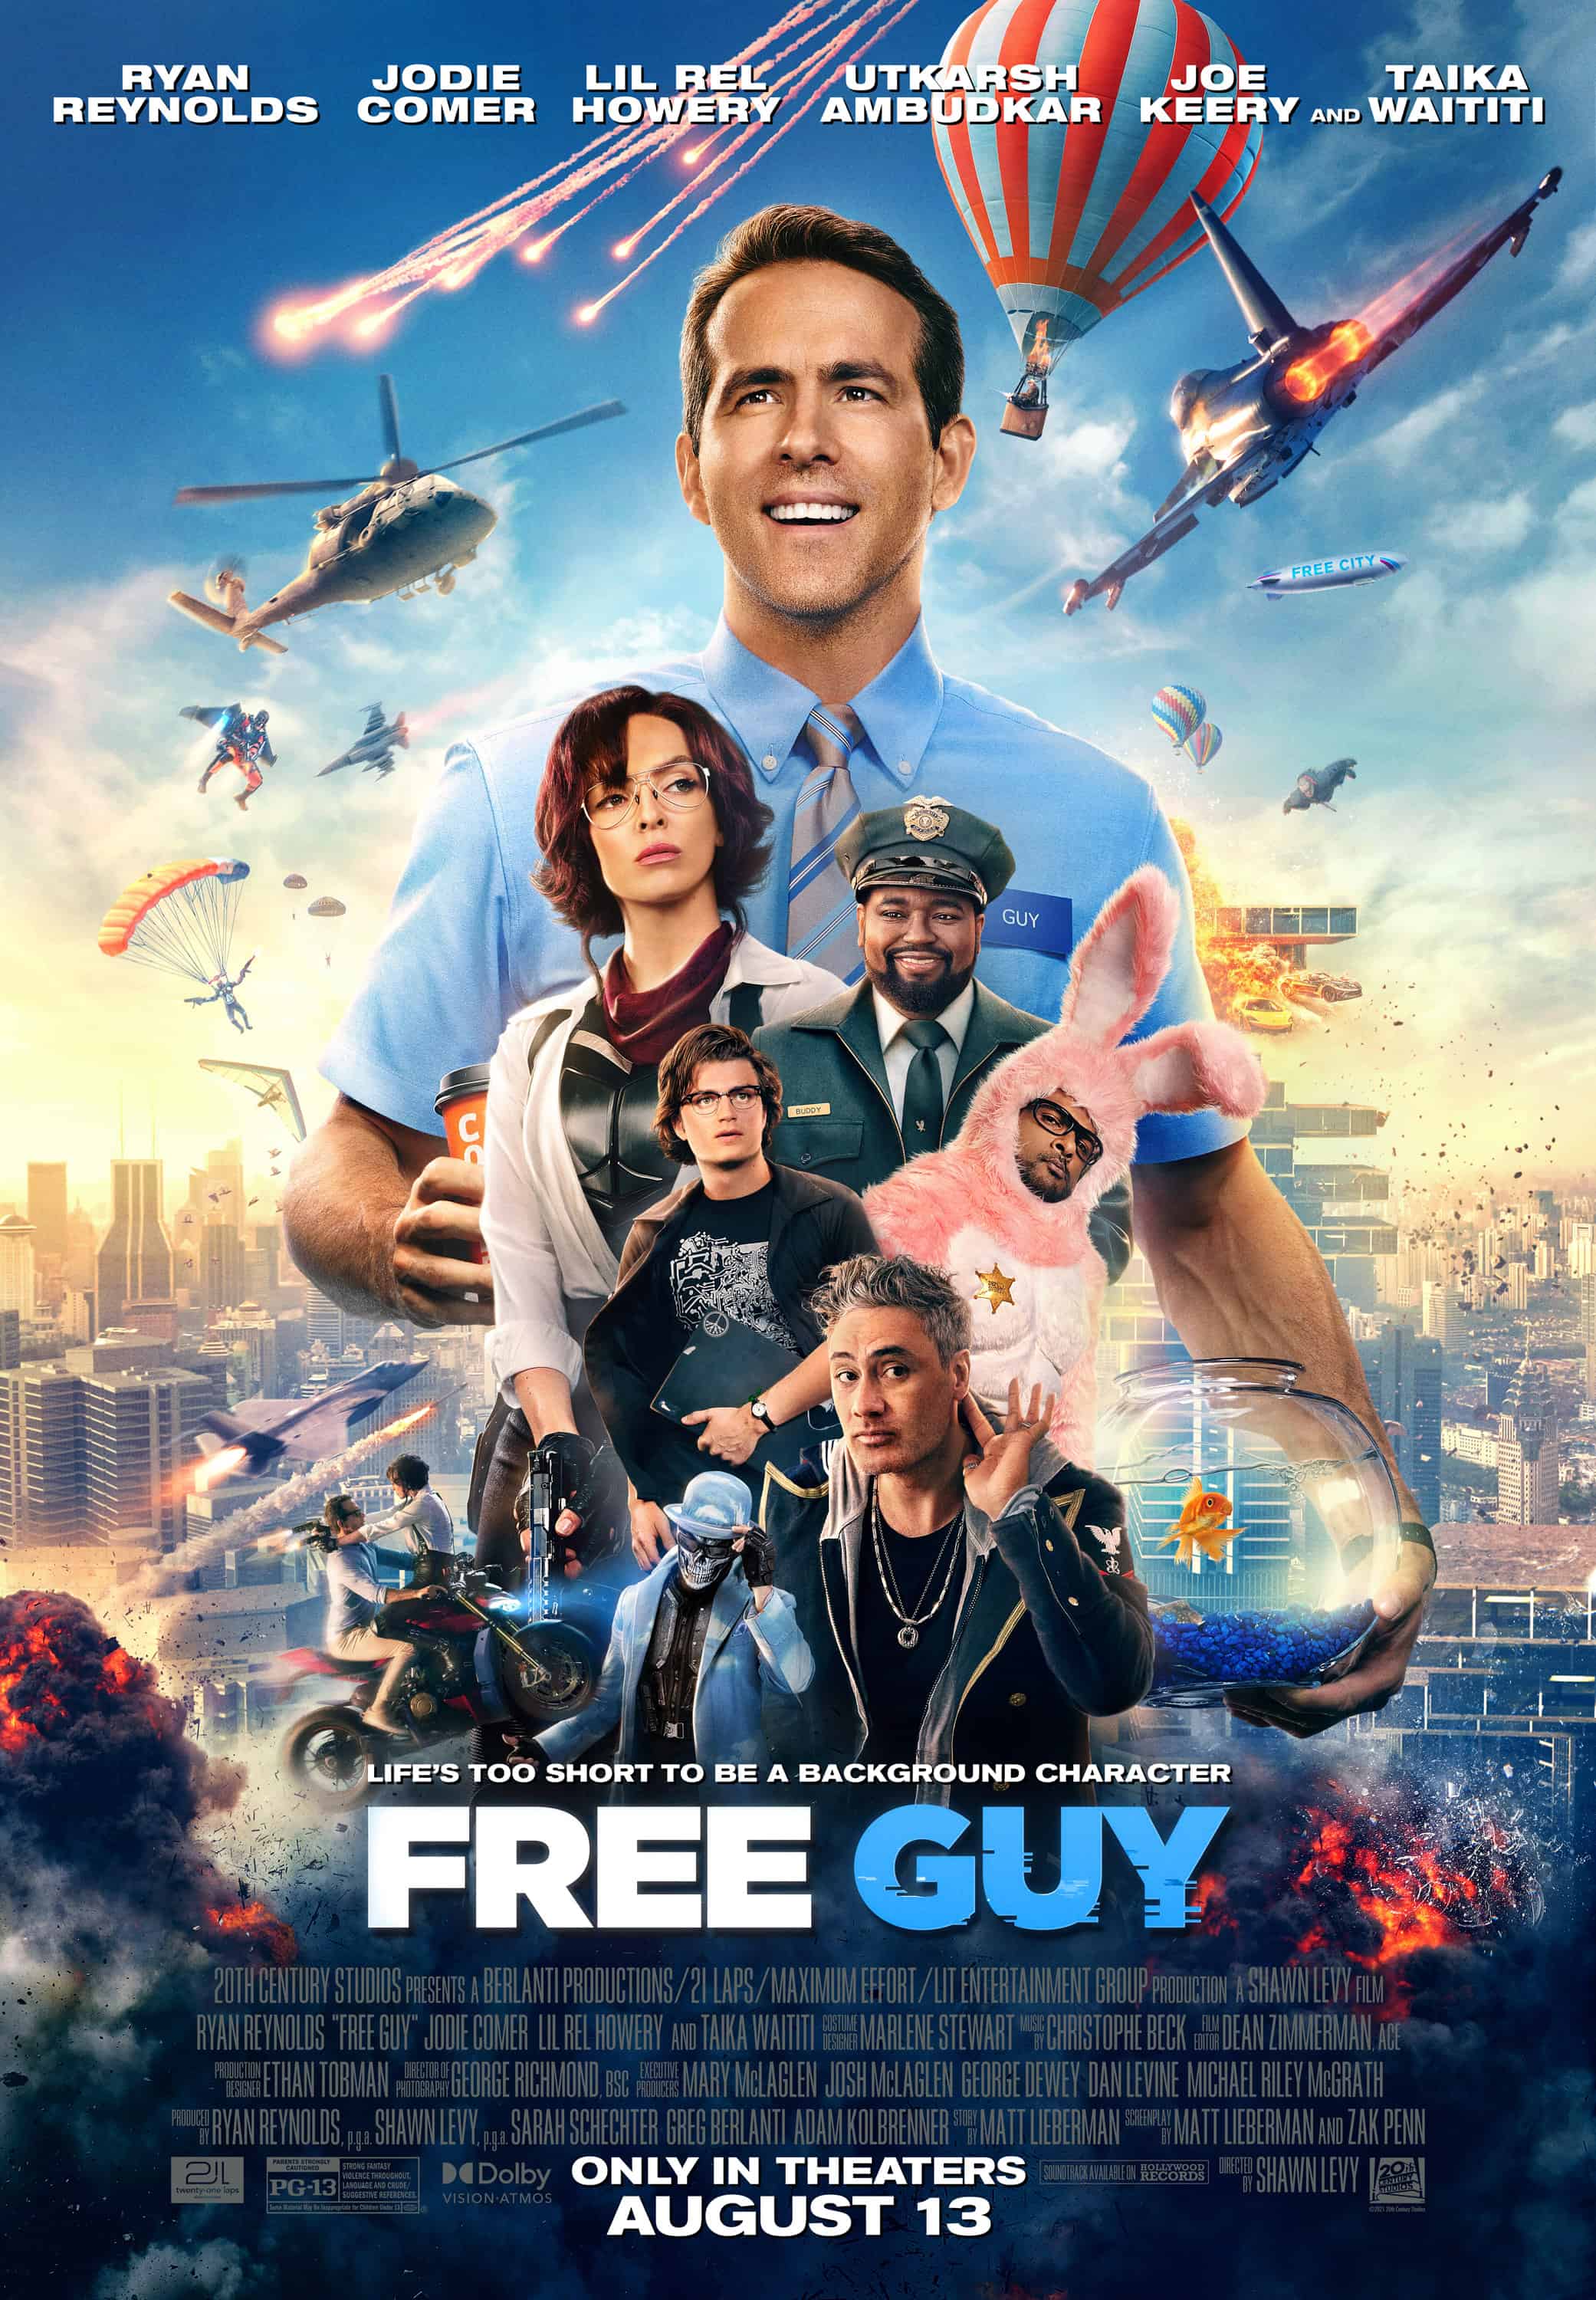 FREE GUY movie review